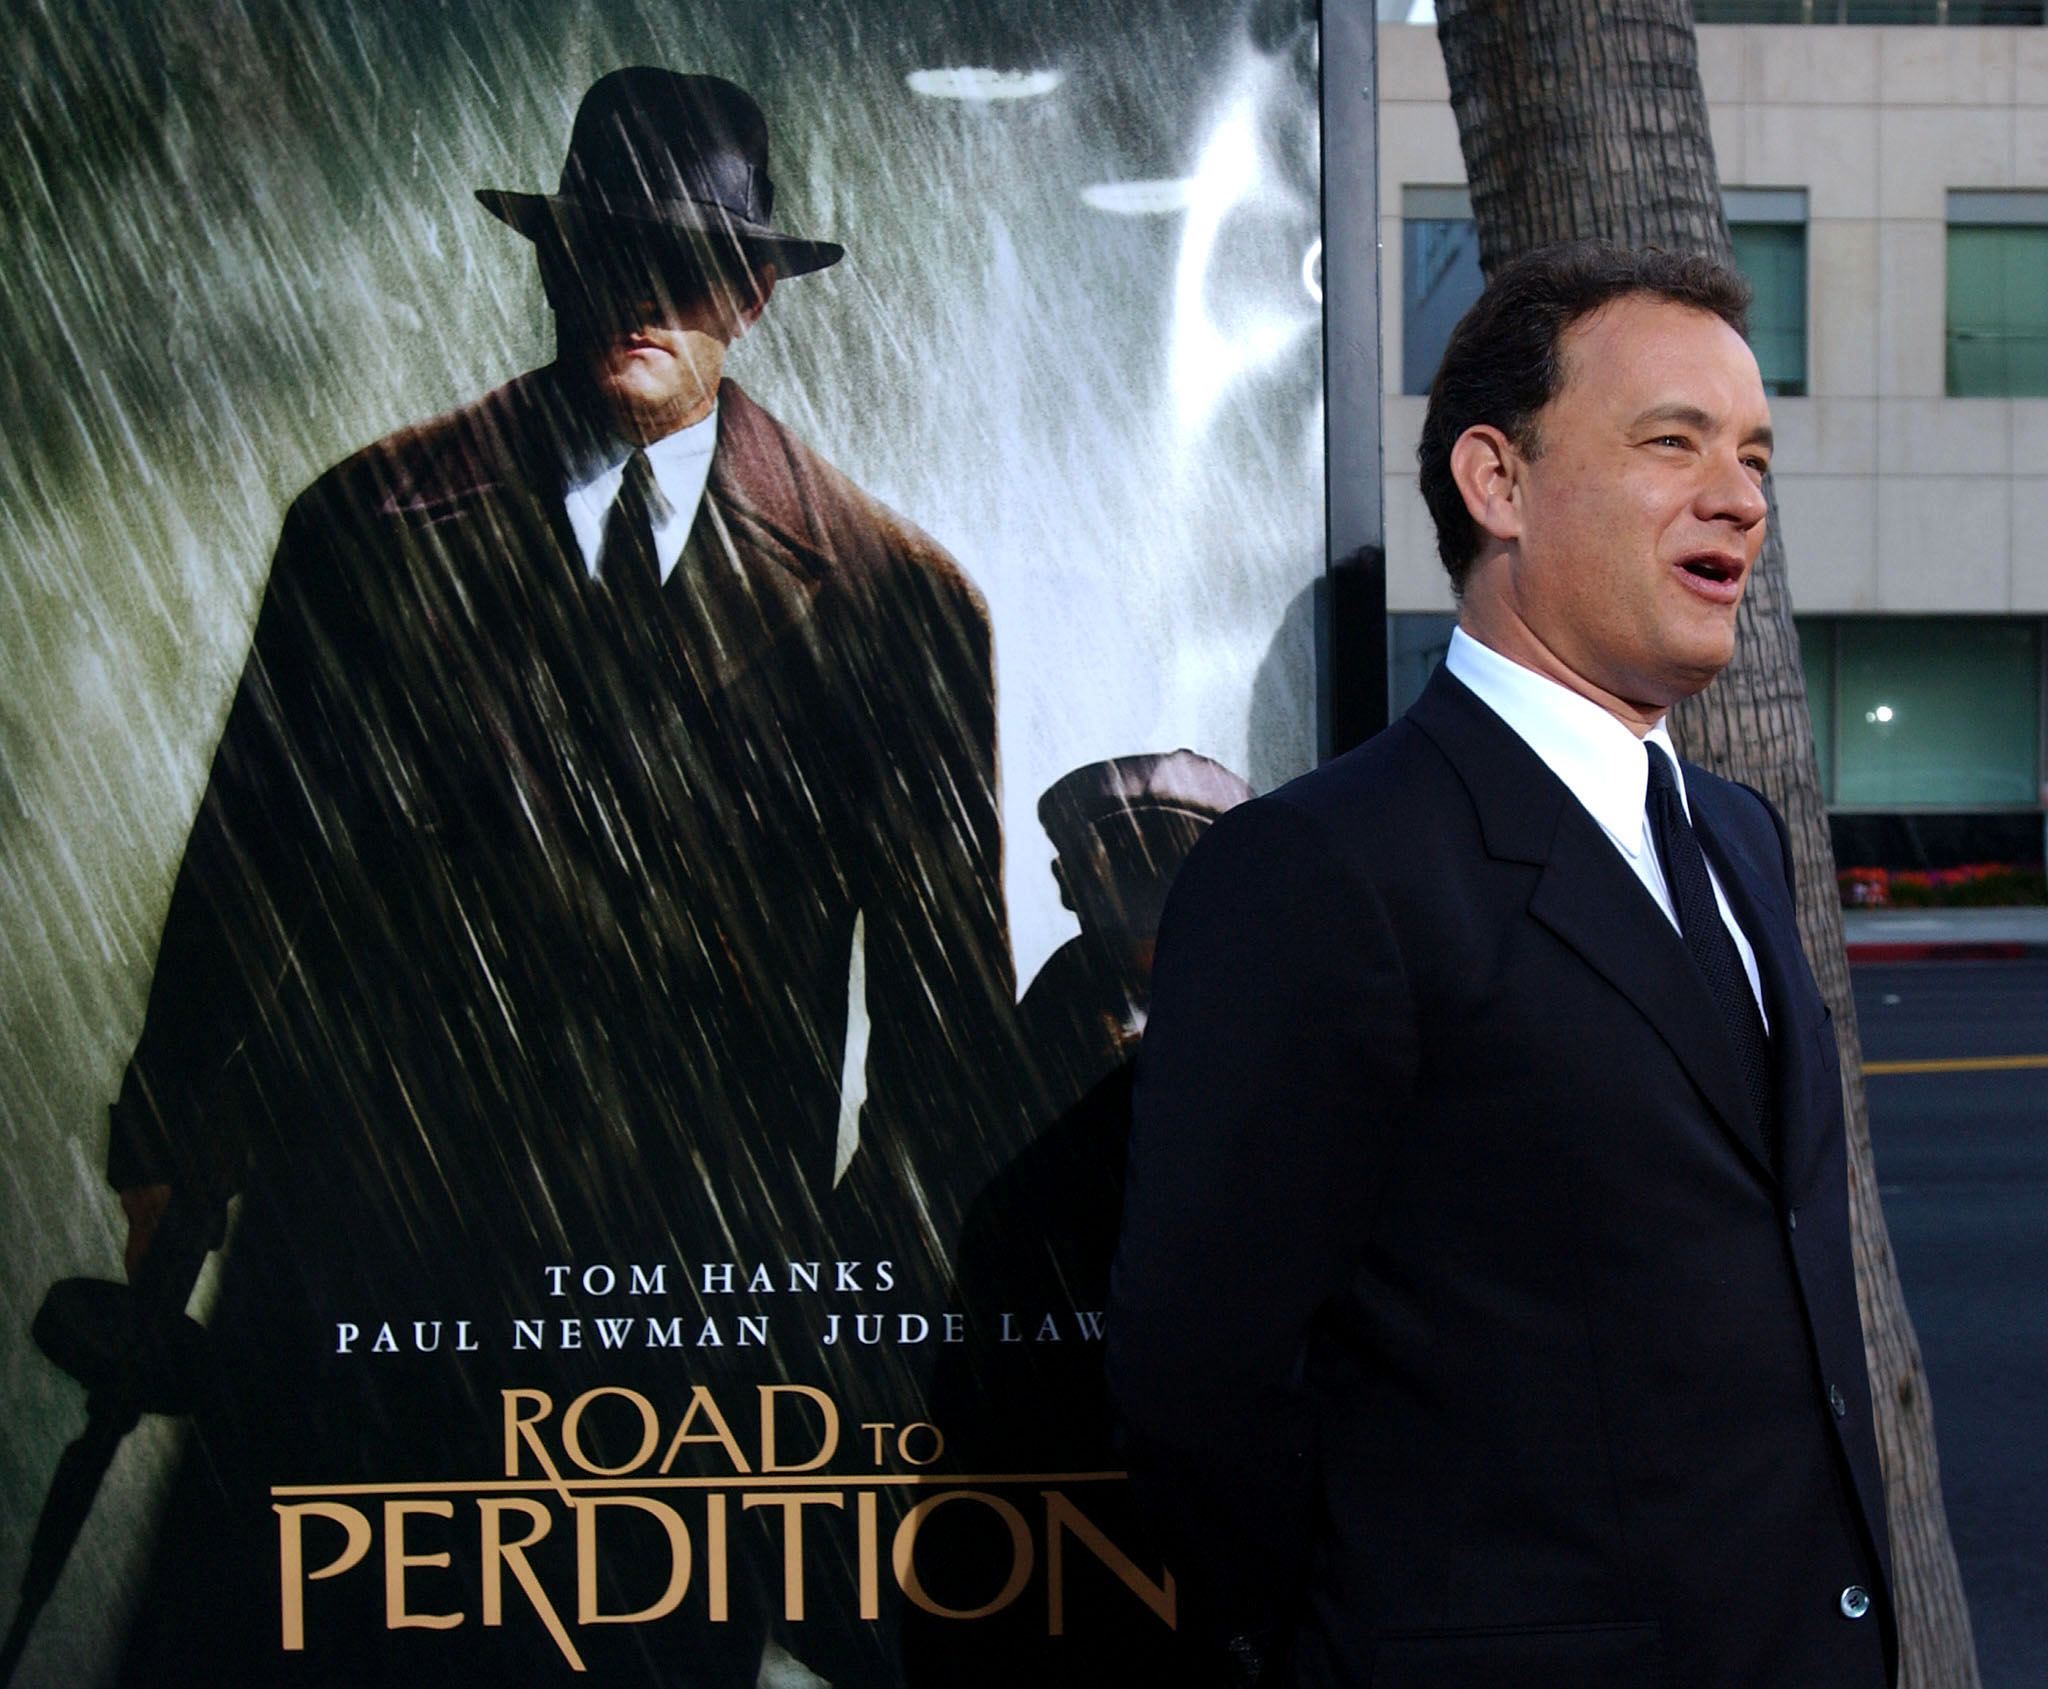 Tom Hanks at the Road to Perdition premiere